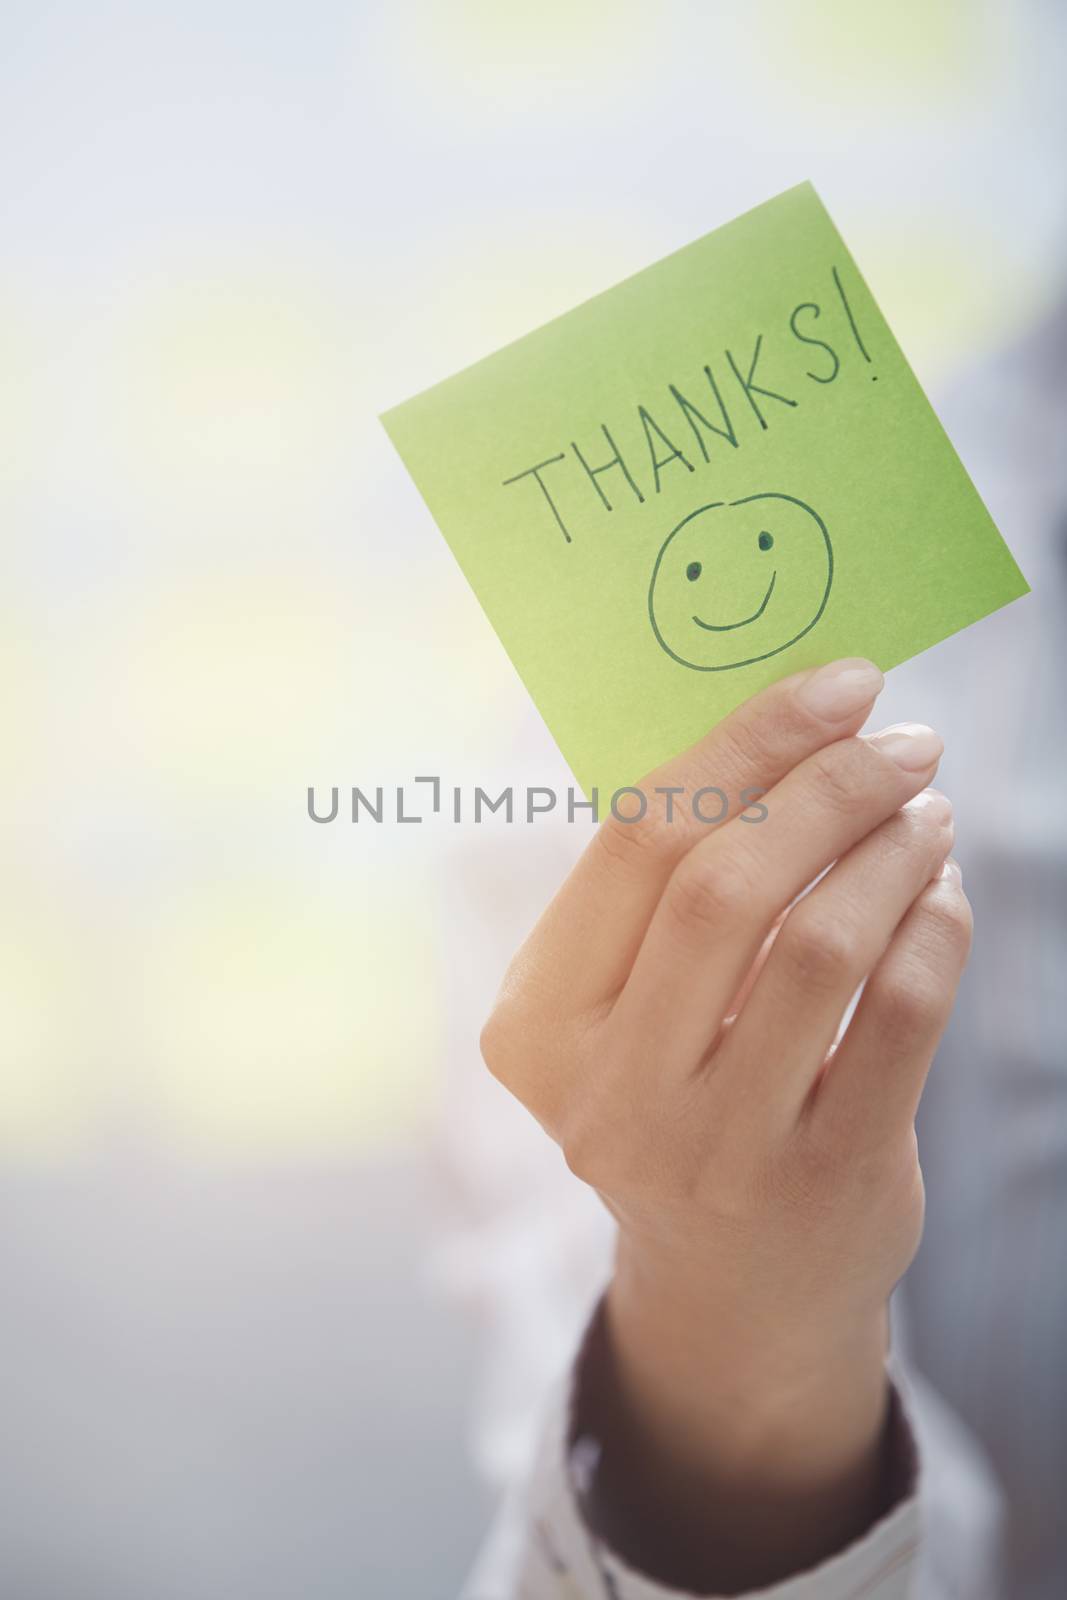 Thanks text on adhesive note by Novic